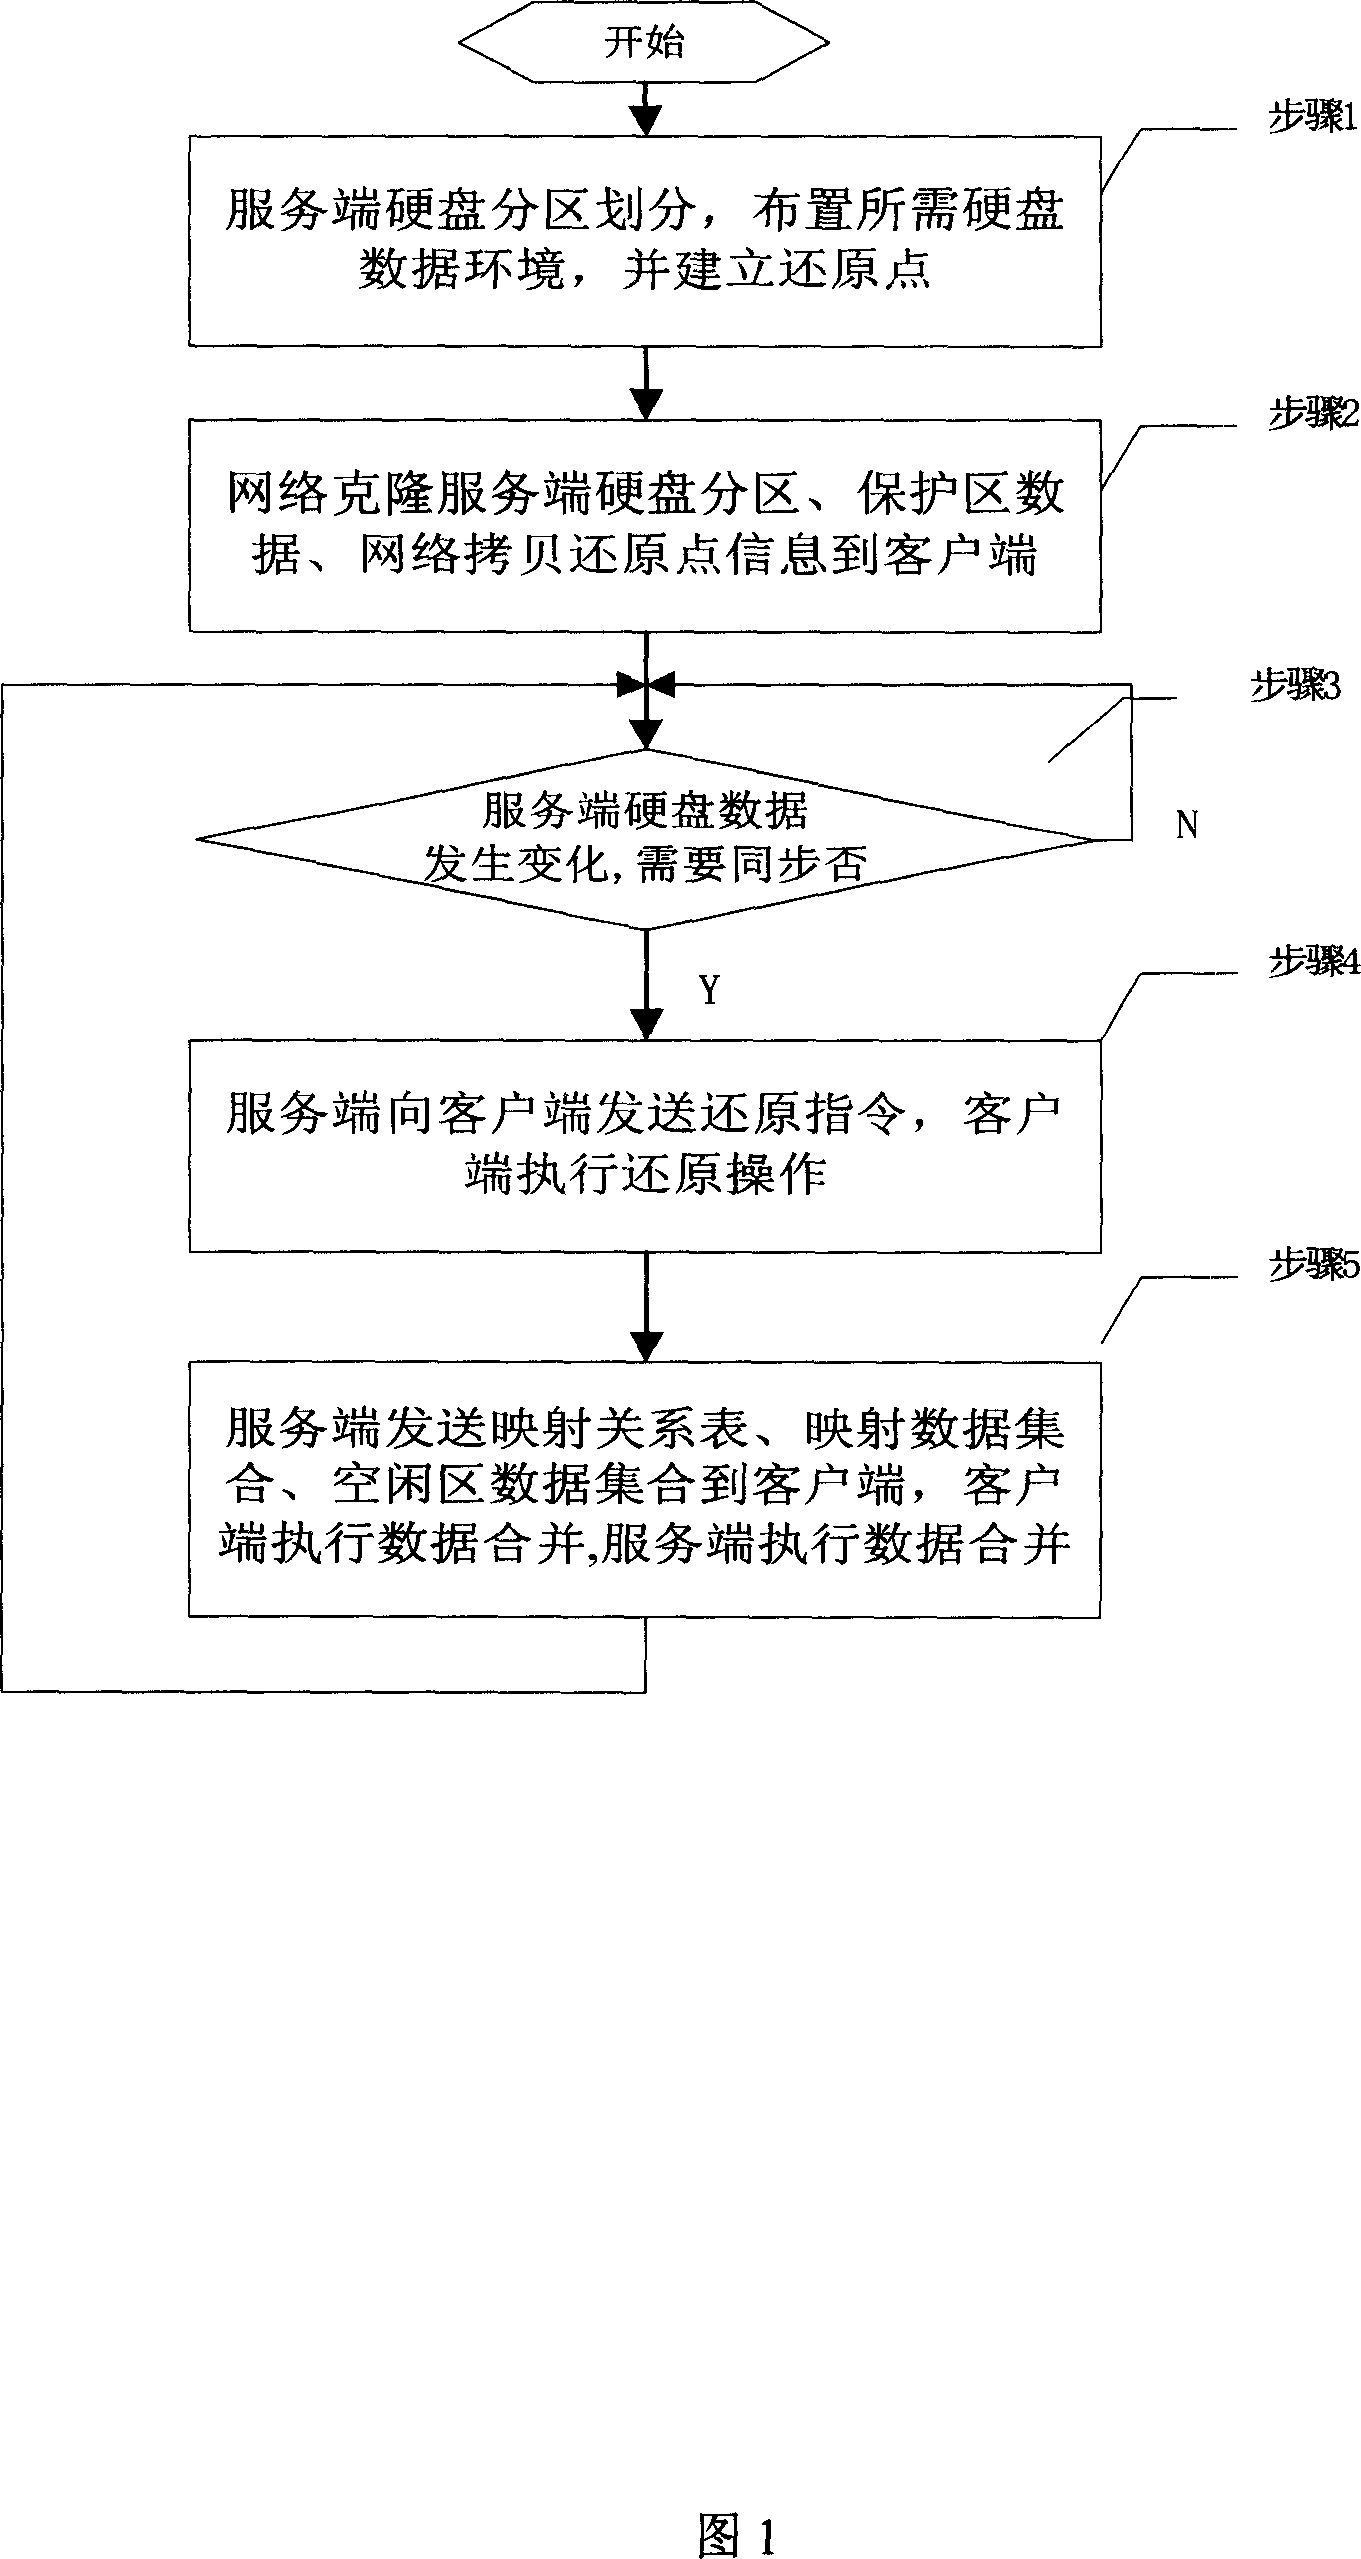 Method for updating data of computer hard disk through network synchronistically